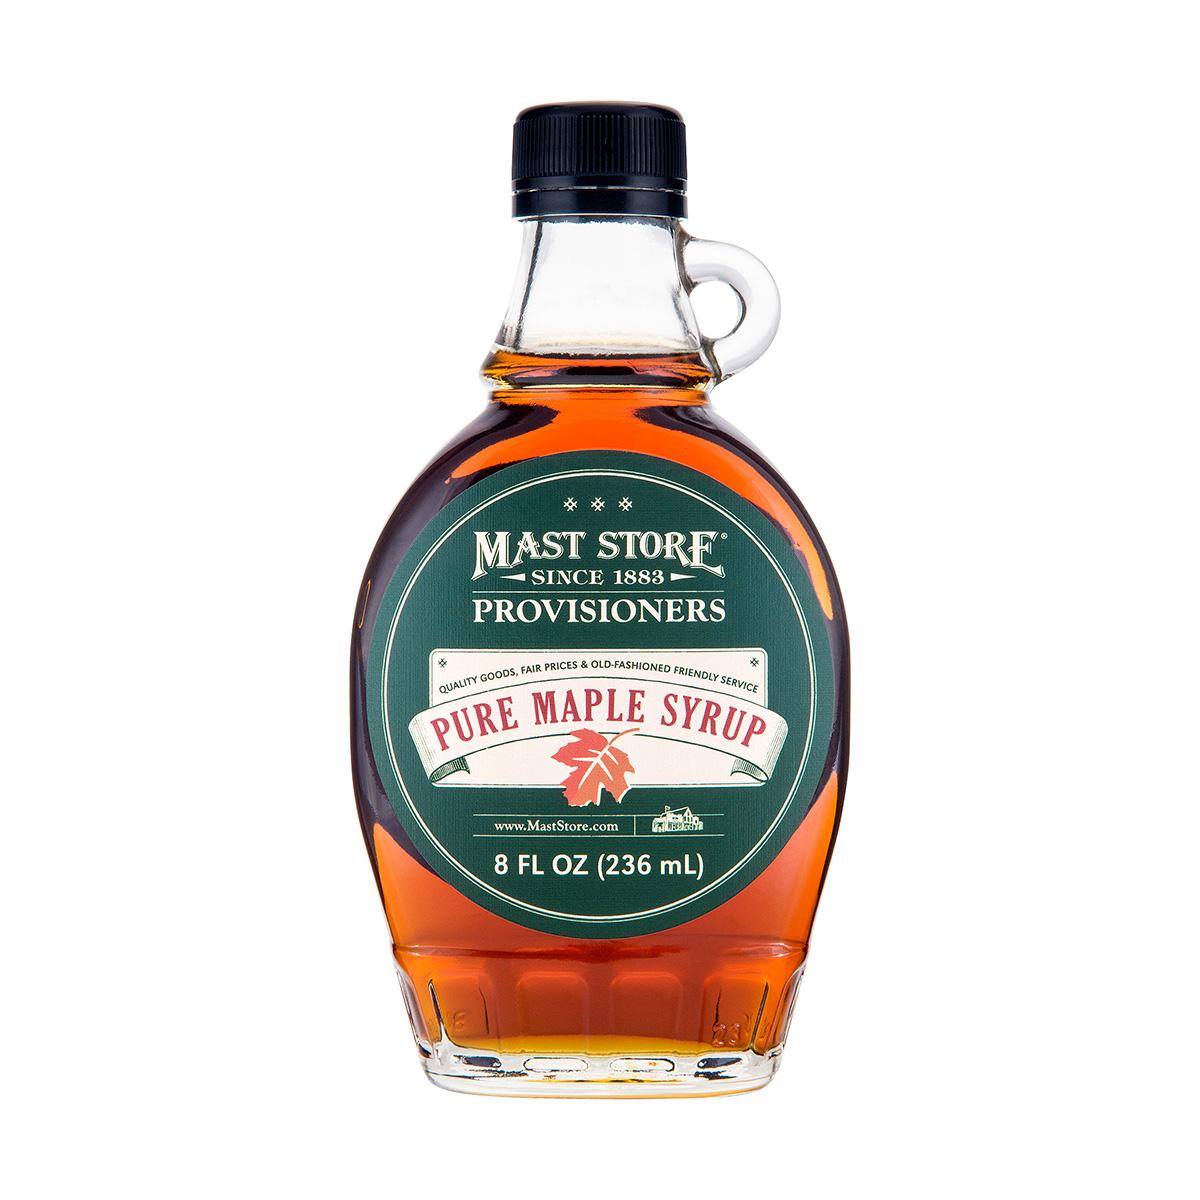  Mast Store Provisioners Pure Maple Syrup